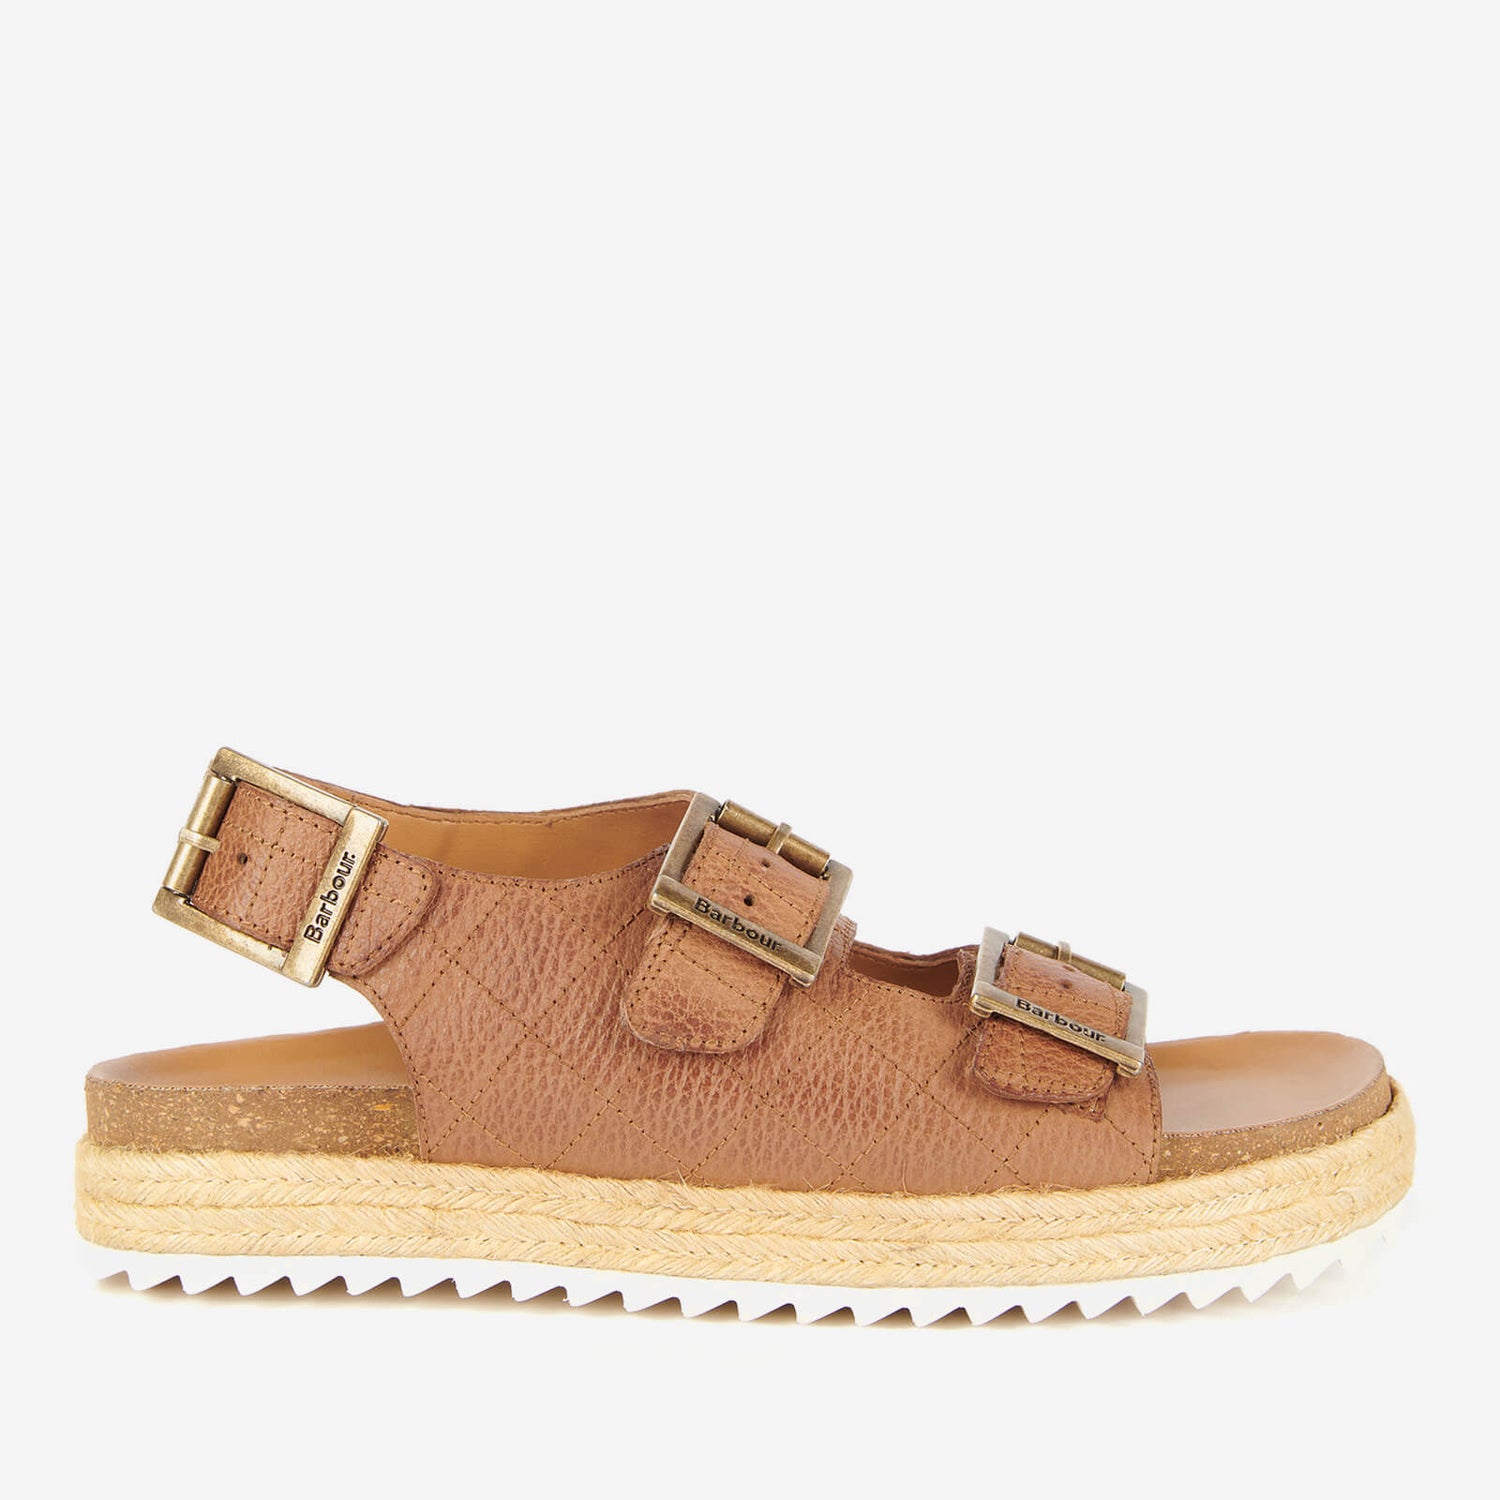 Barbour Helena Double Strap Leather Sandals - UK 3